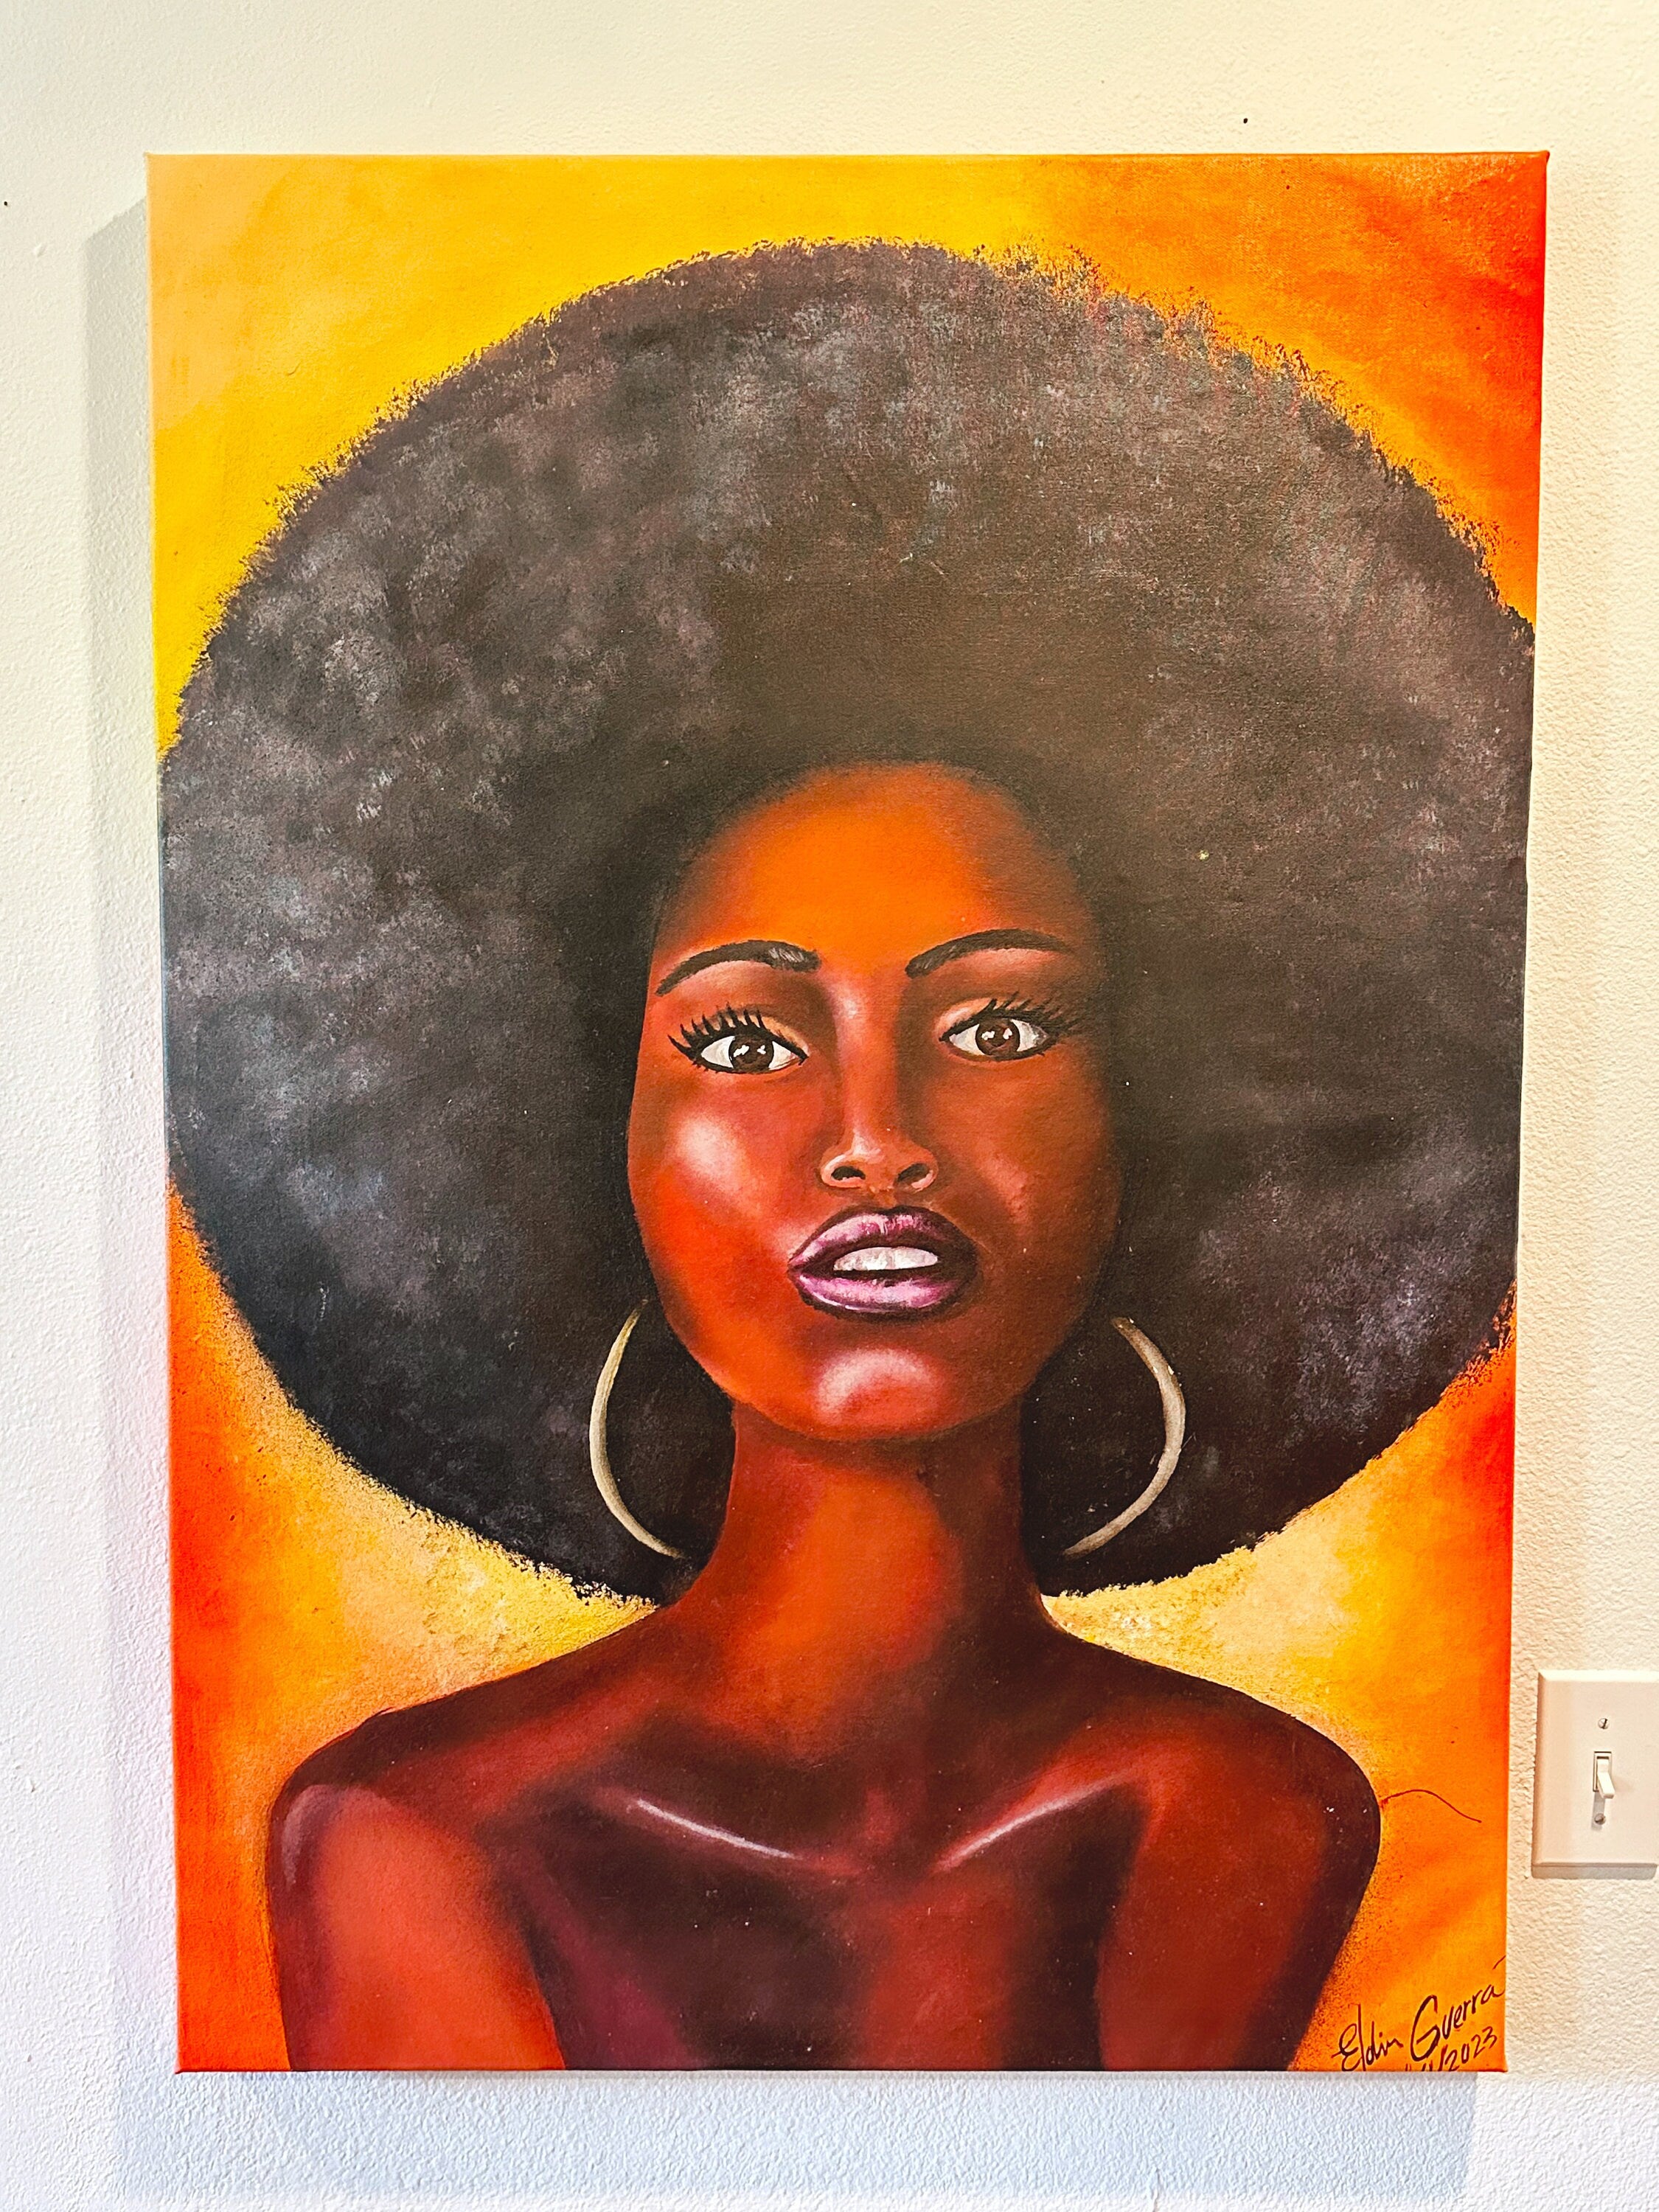 Original Large Oil painting on Canvas of Beautiful African Woman 44"x31" | Signed by Columbian Artist | Colorful Gallery Wall Decor